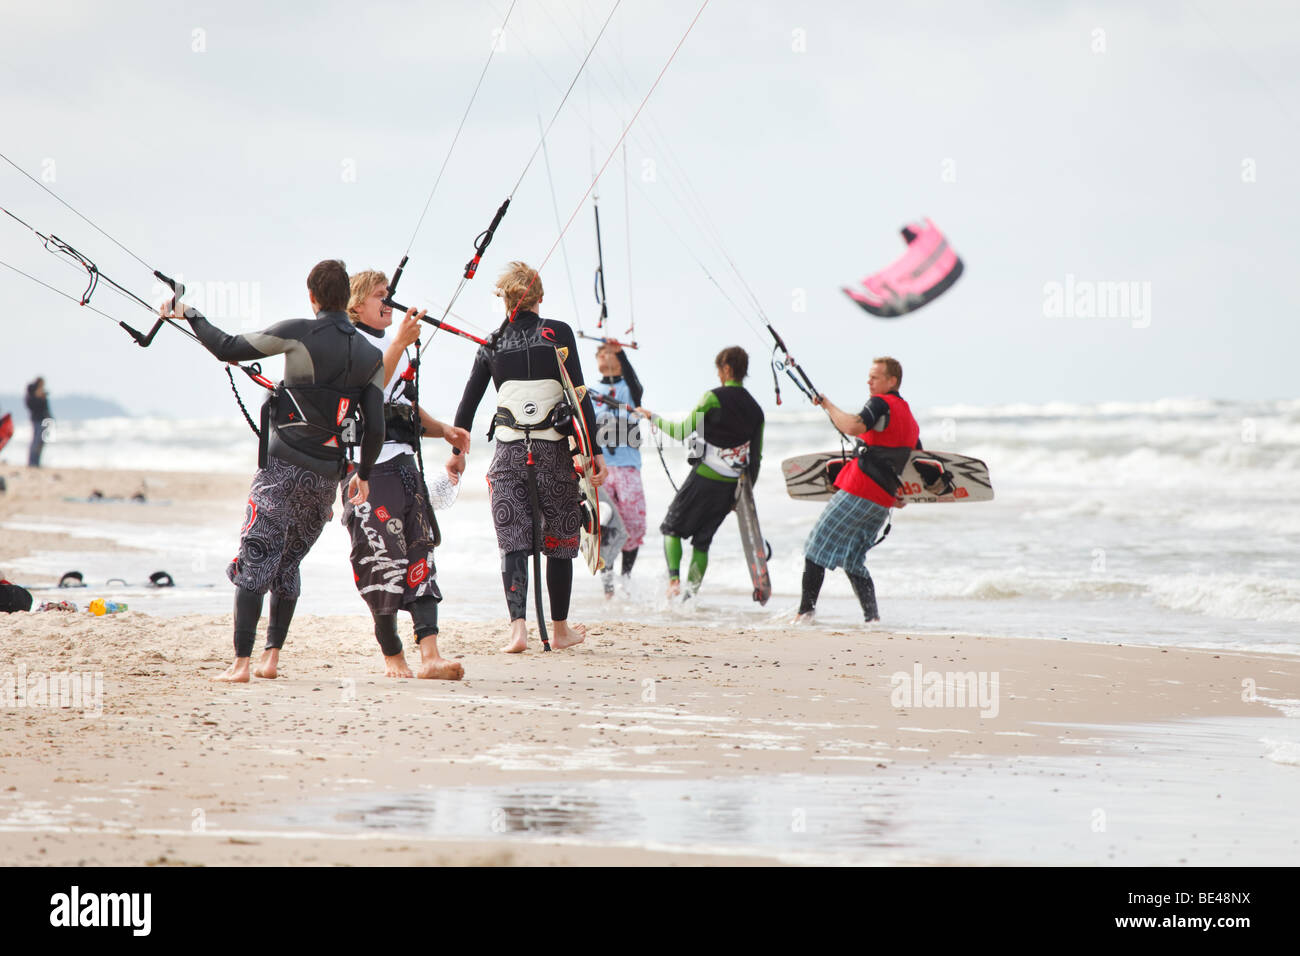 Kiteboarding competition with many active people and kites flying high in the sky Stock Photo